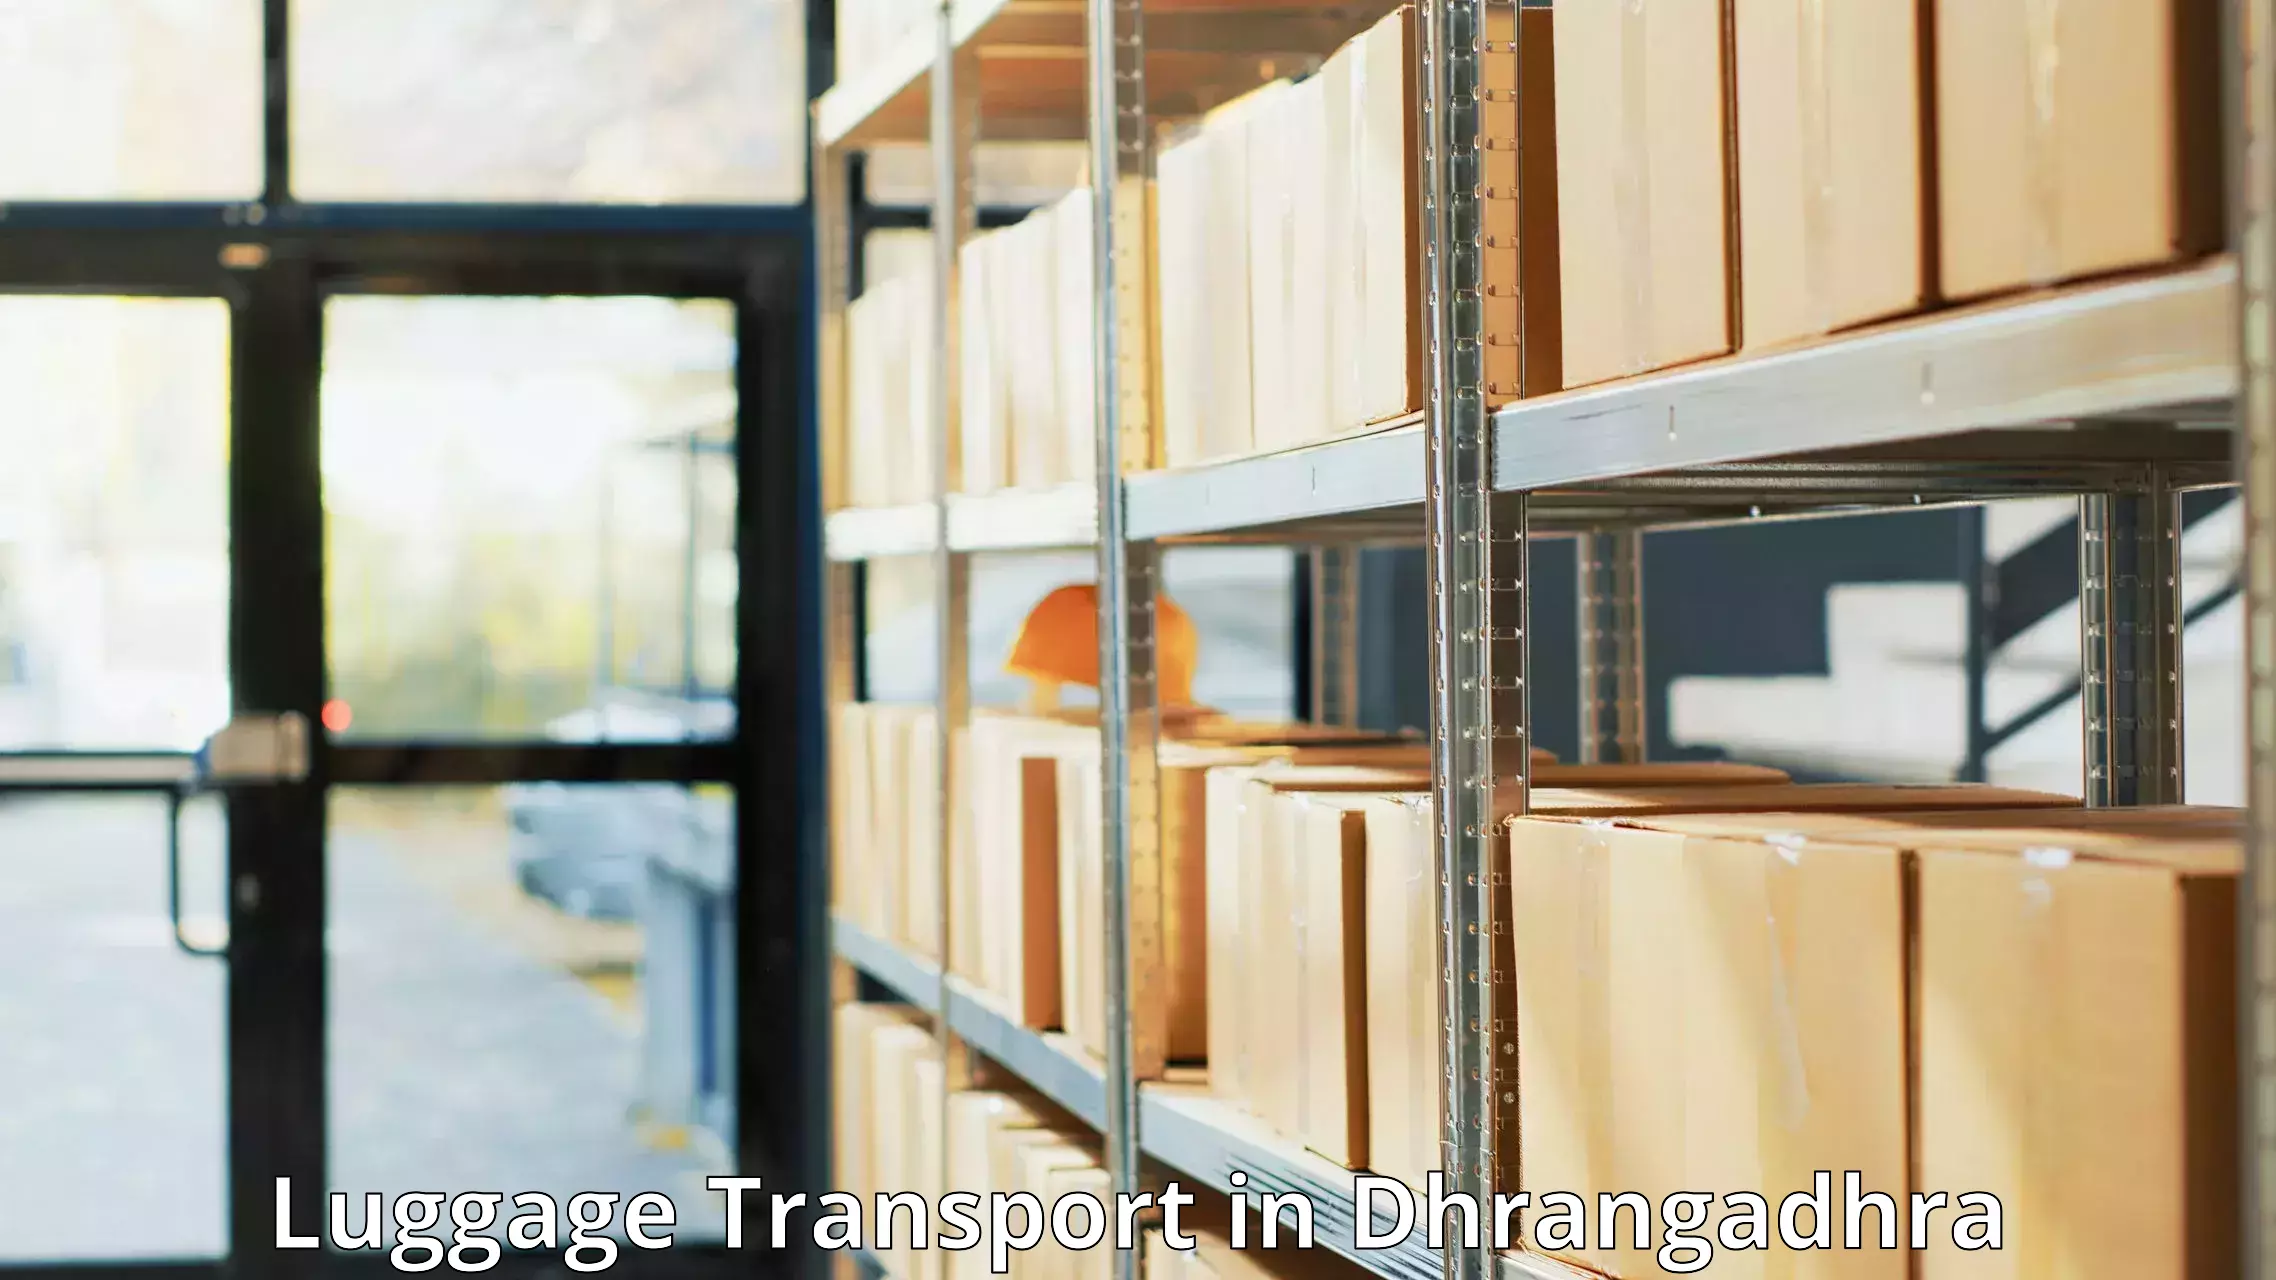 Luggage transport consulting in Dhrangadhra